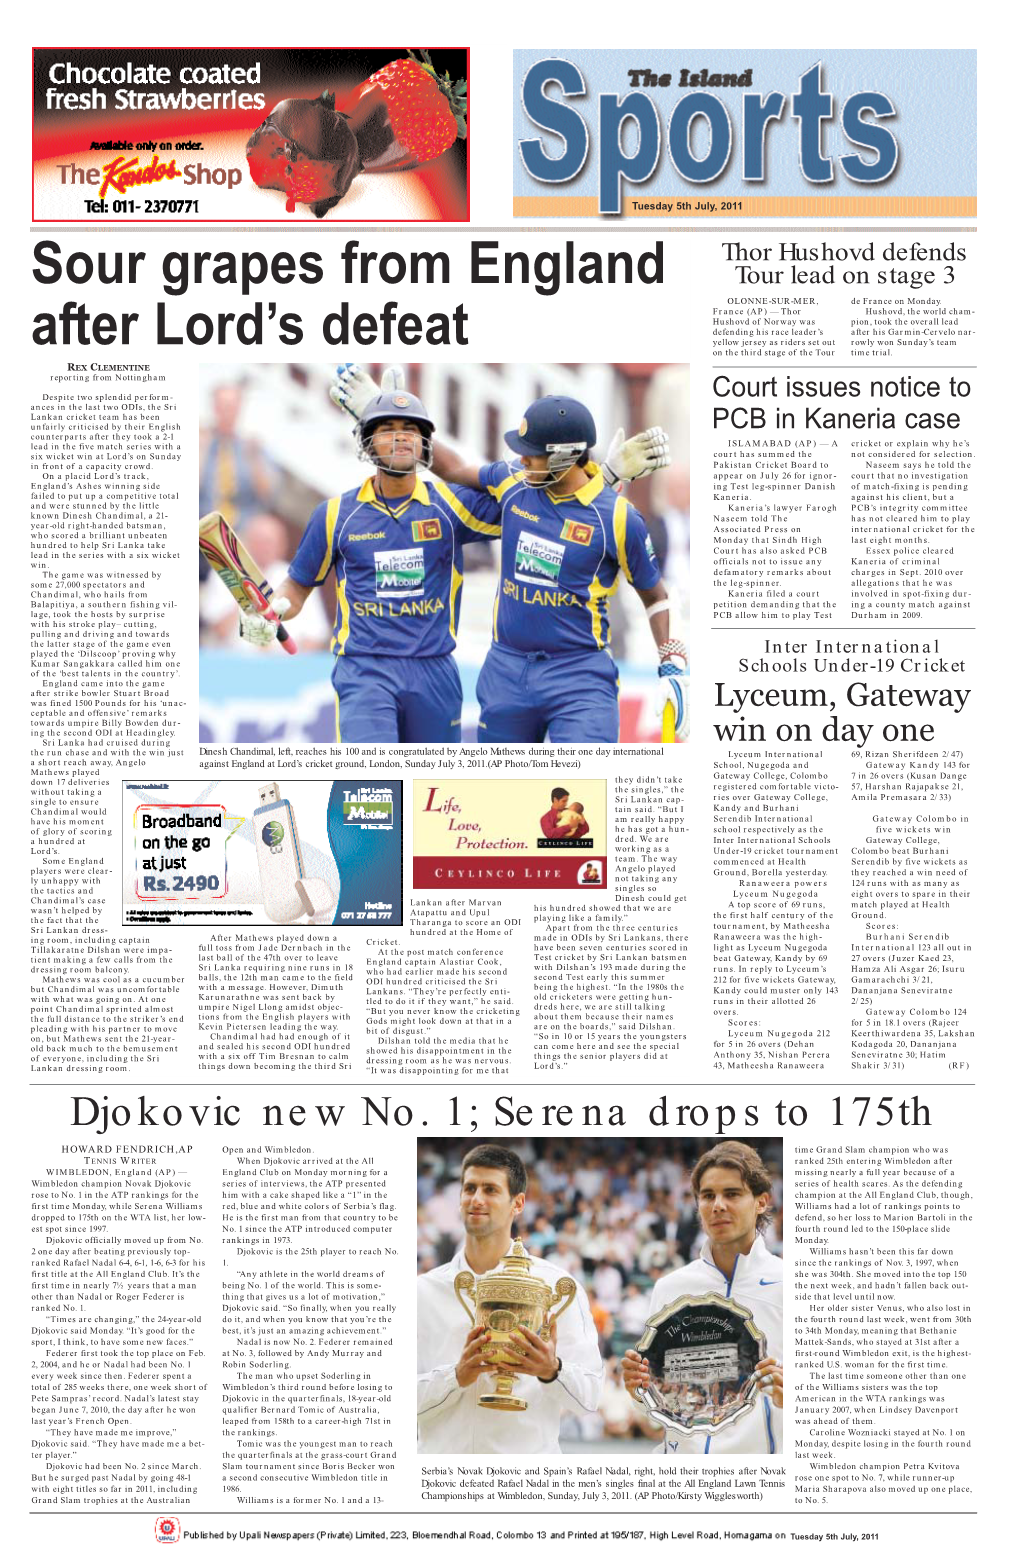 Sour Grapes from England After Lord's Defeat